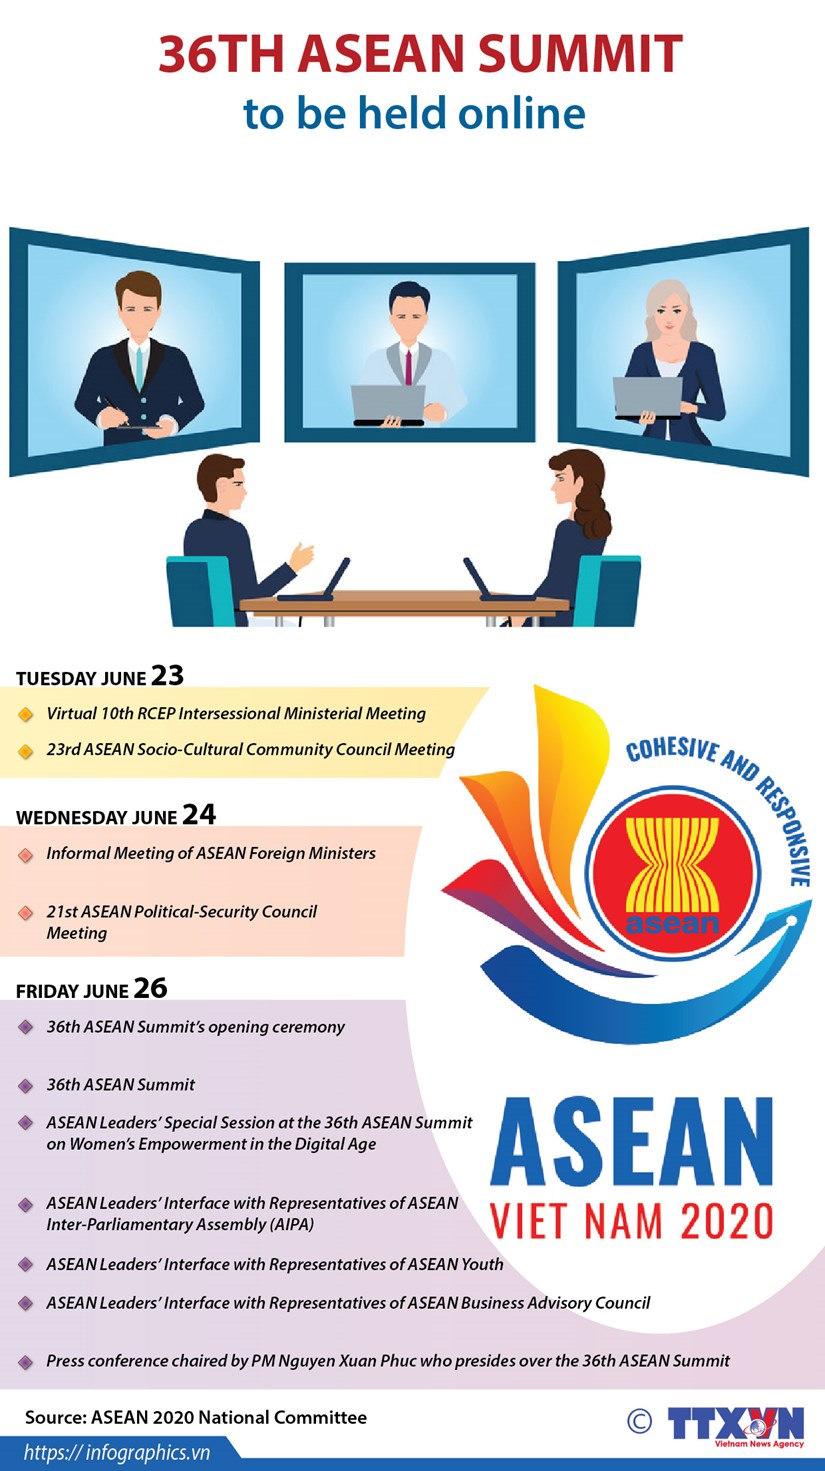 36th ASEAN Summit to be held online hinh anh 1